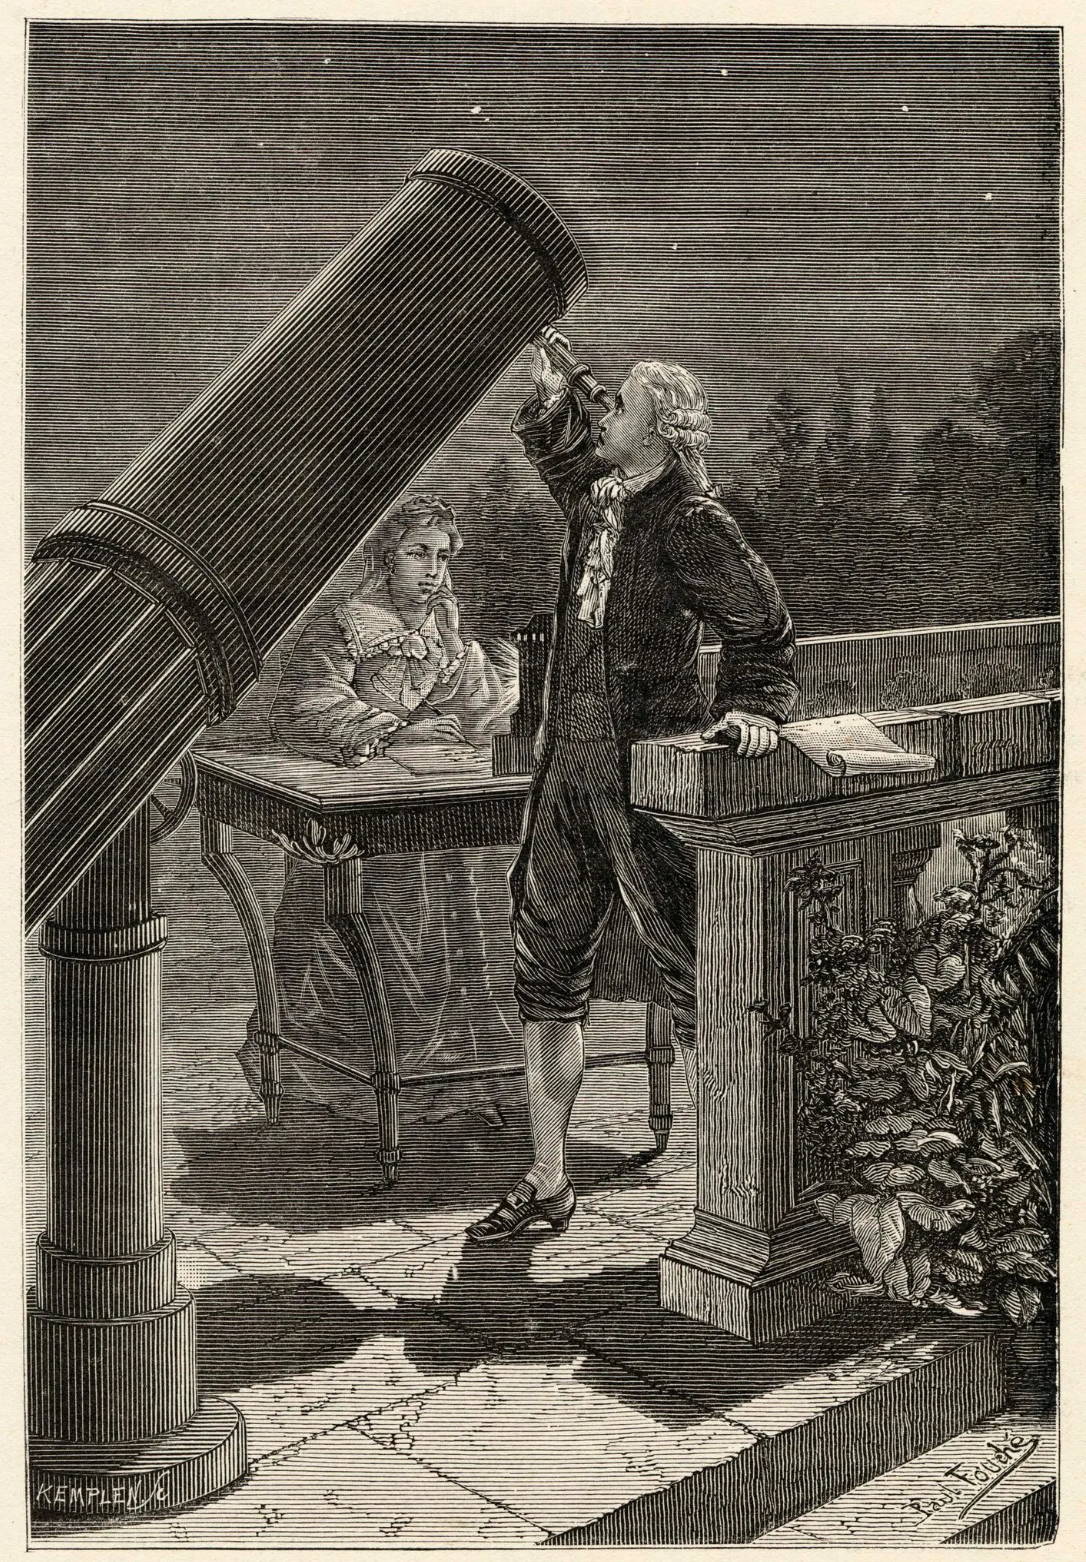 Before discovering the planet we now know as Uranus via telescope, William Herschel was known for playing with his organ